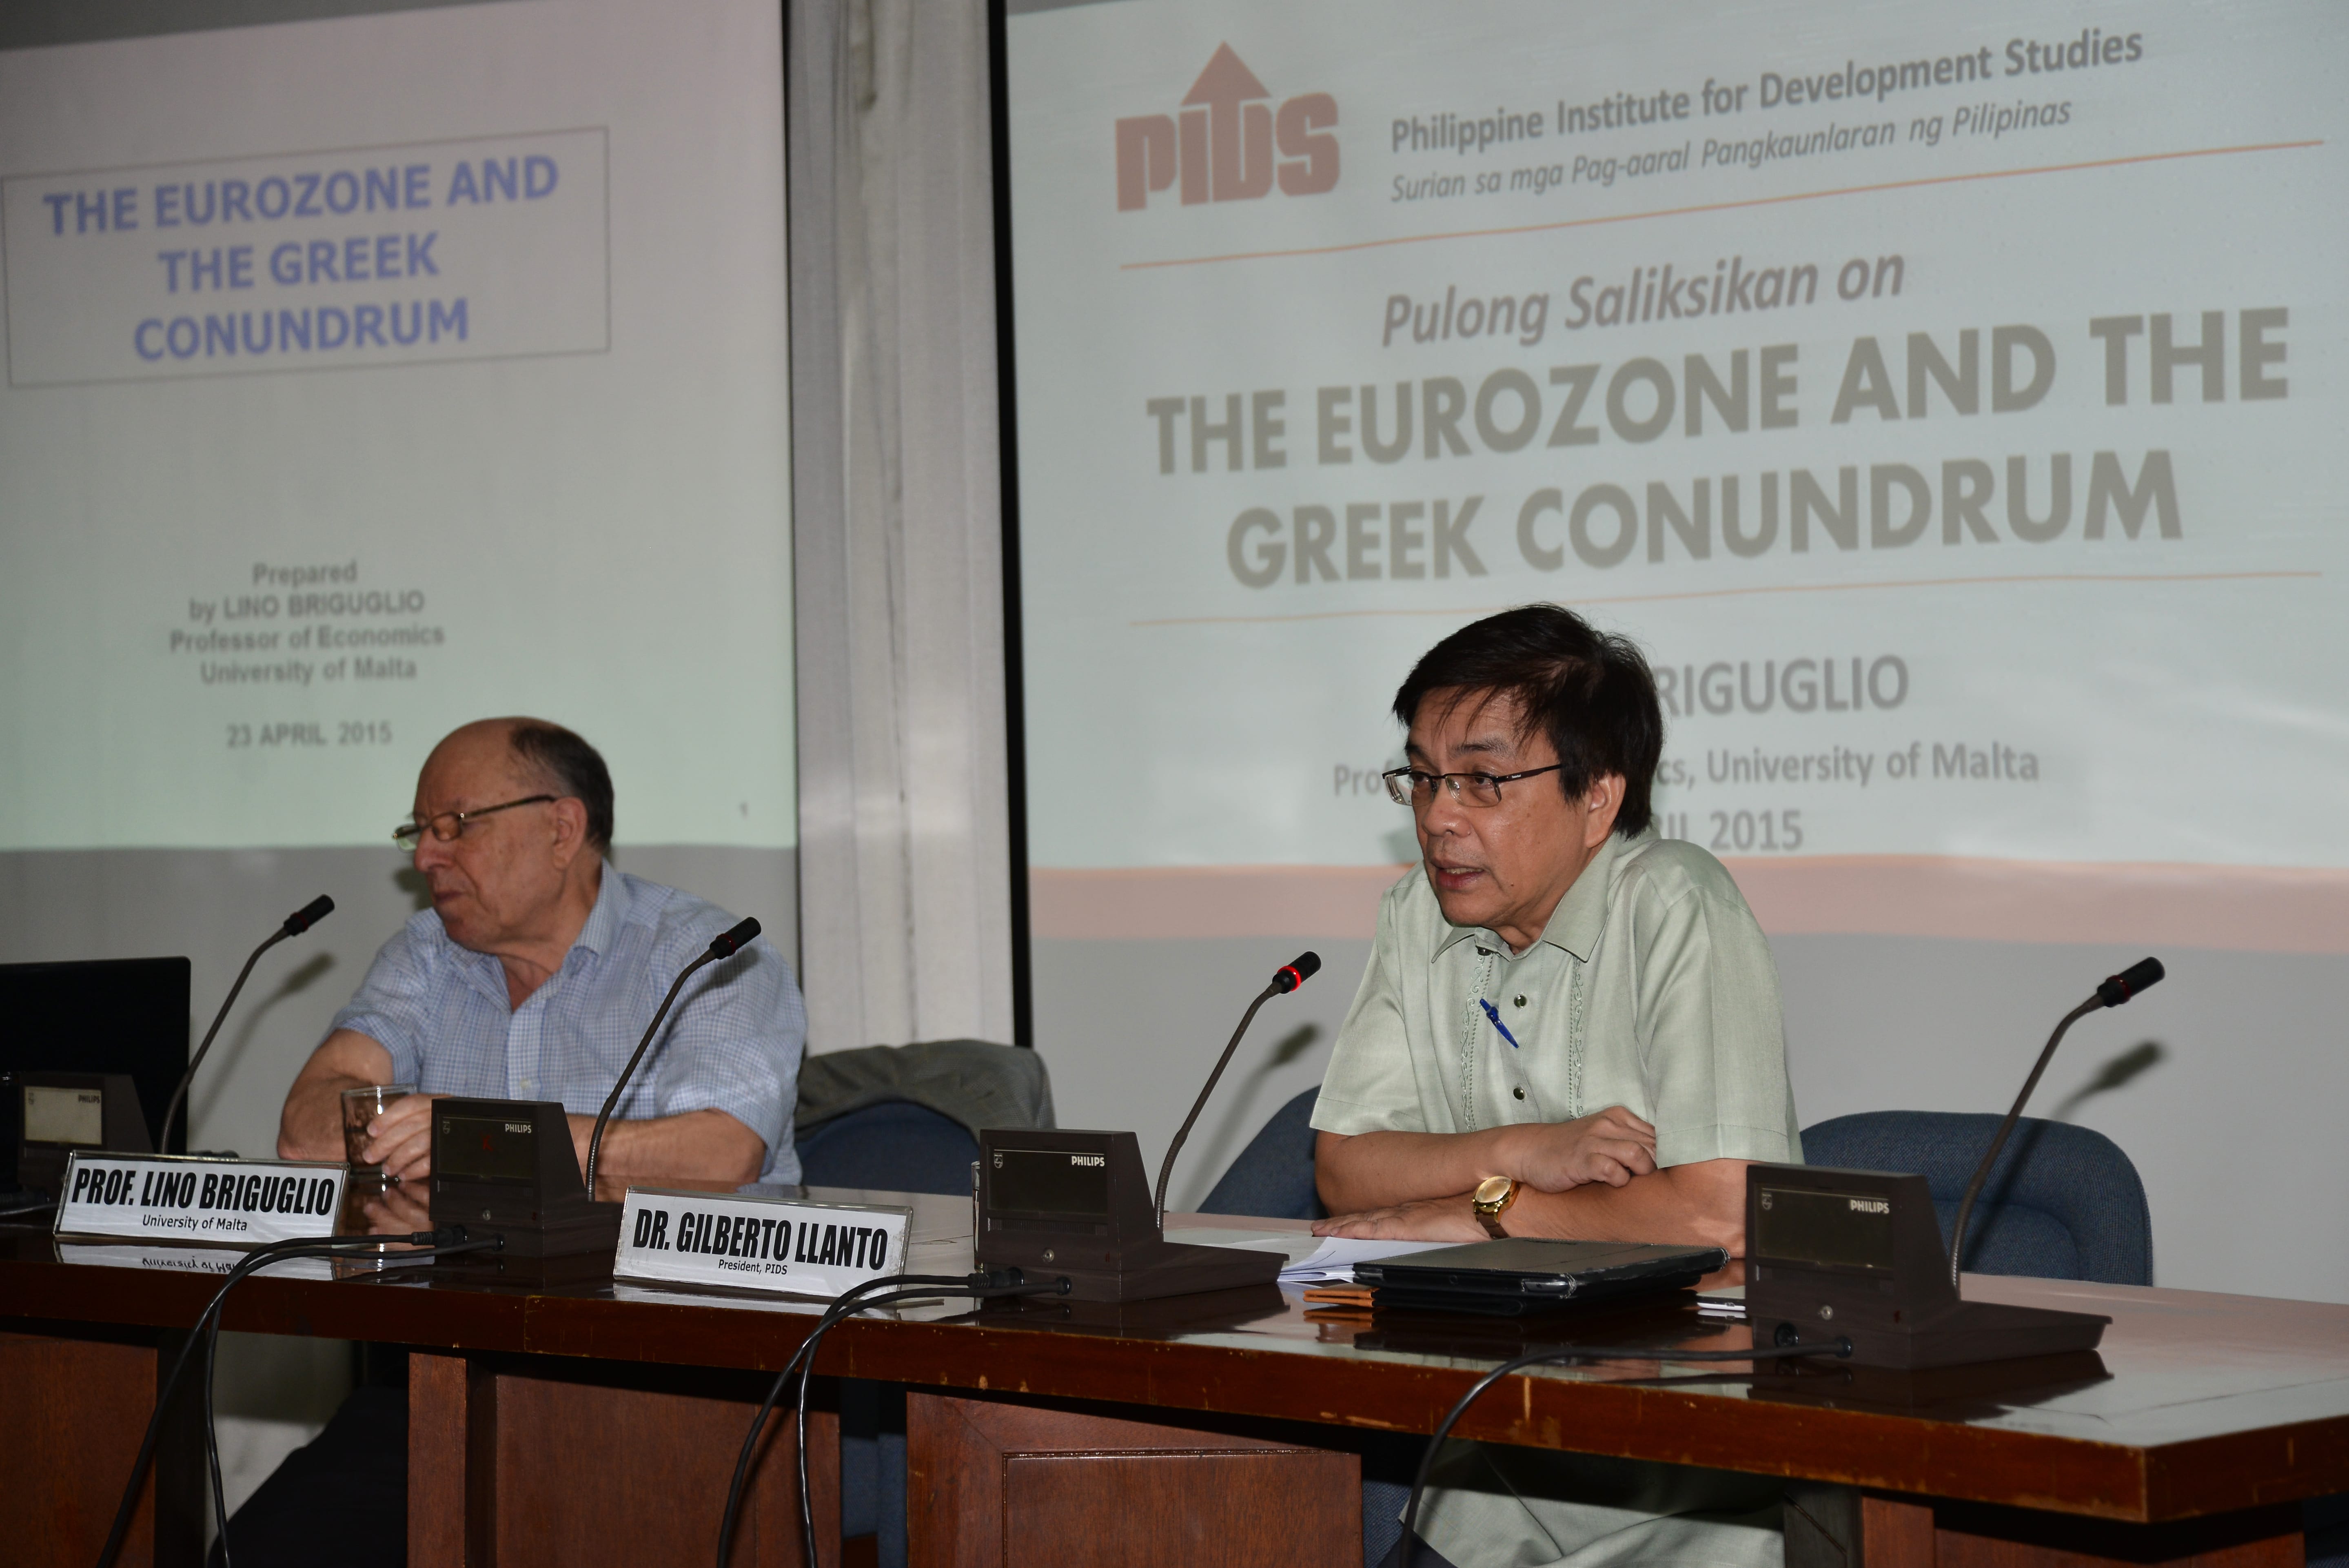 Pulong Saliksikan On The Eurozone And The Greek Conundrum-DSC_1259.jpg